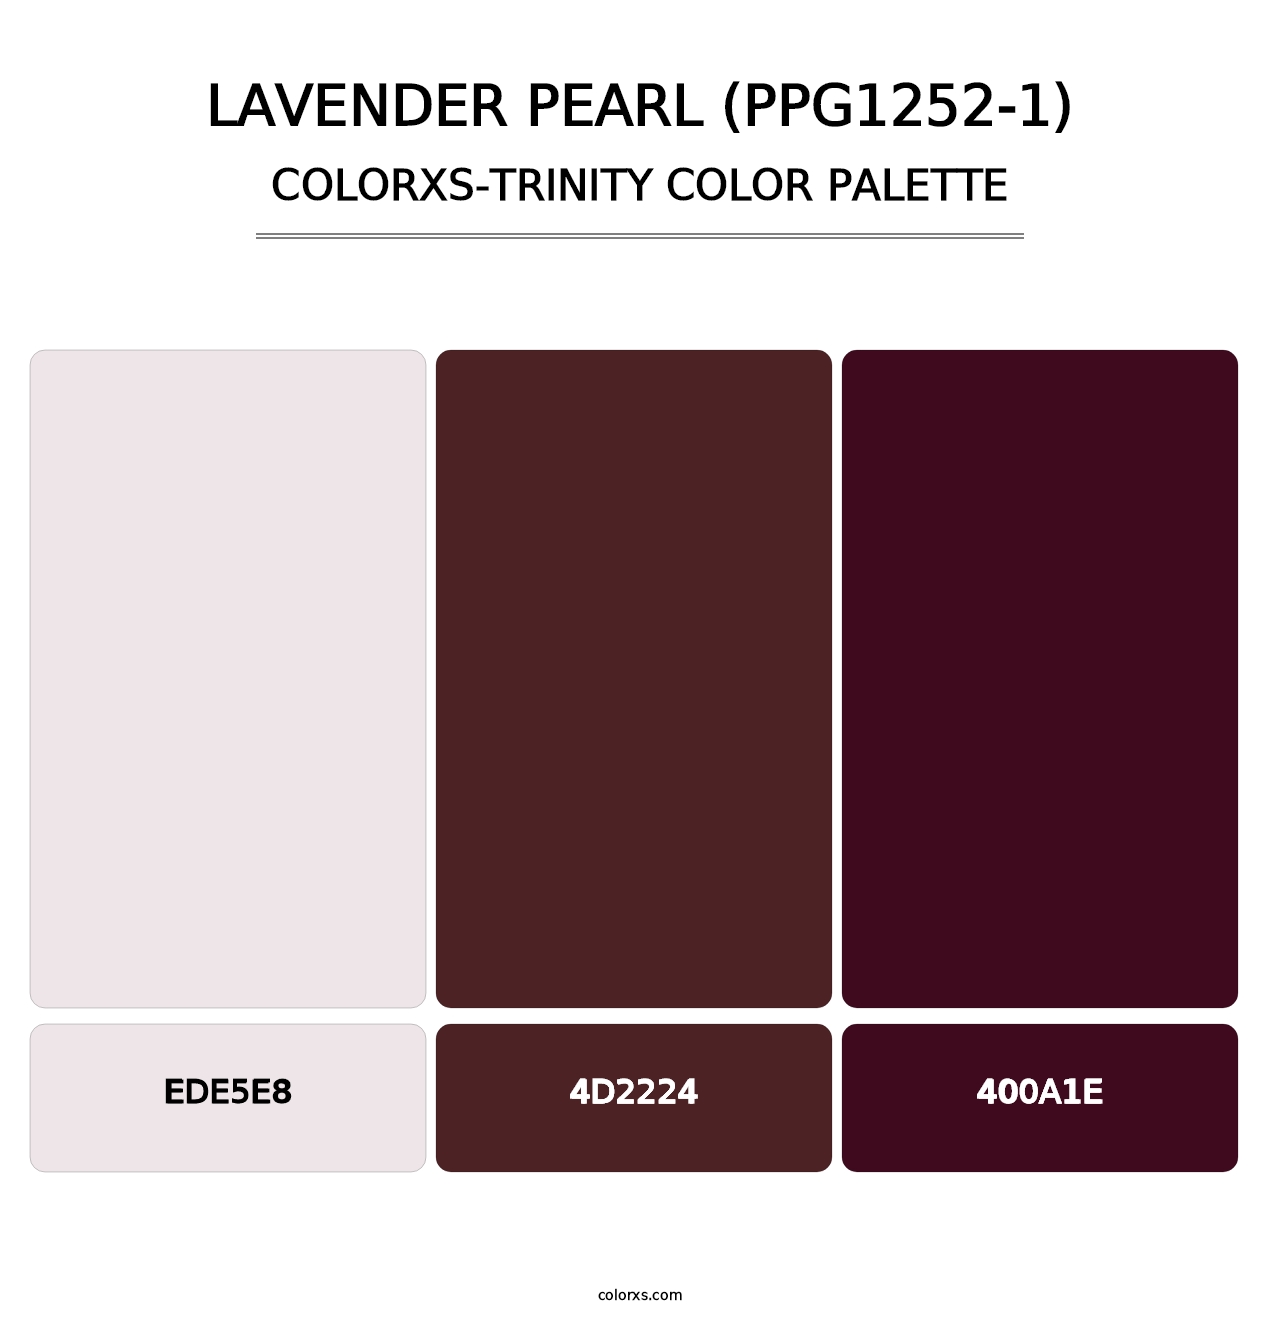 Lavender Pearl (PPG1252-1) - Colorxs Trinity Palette